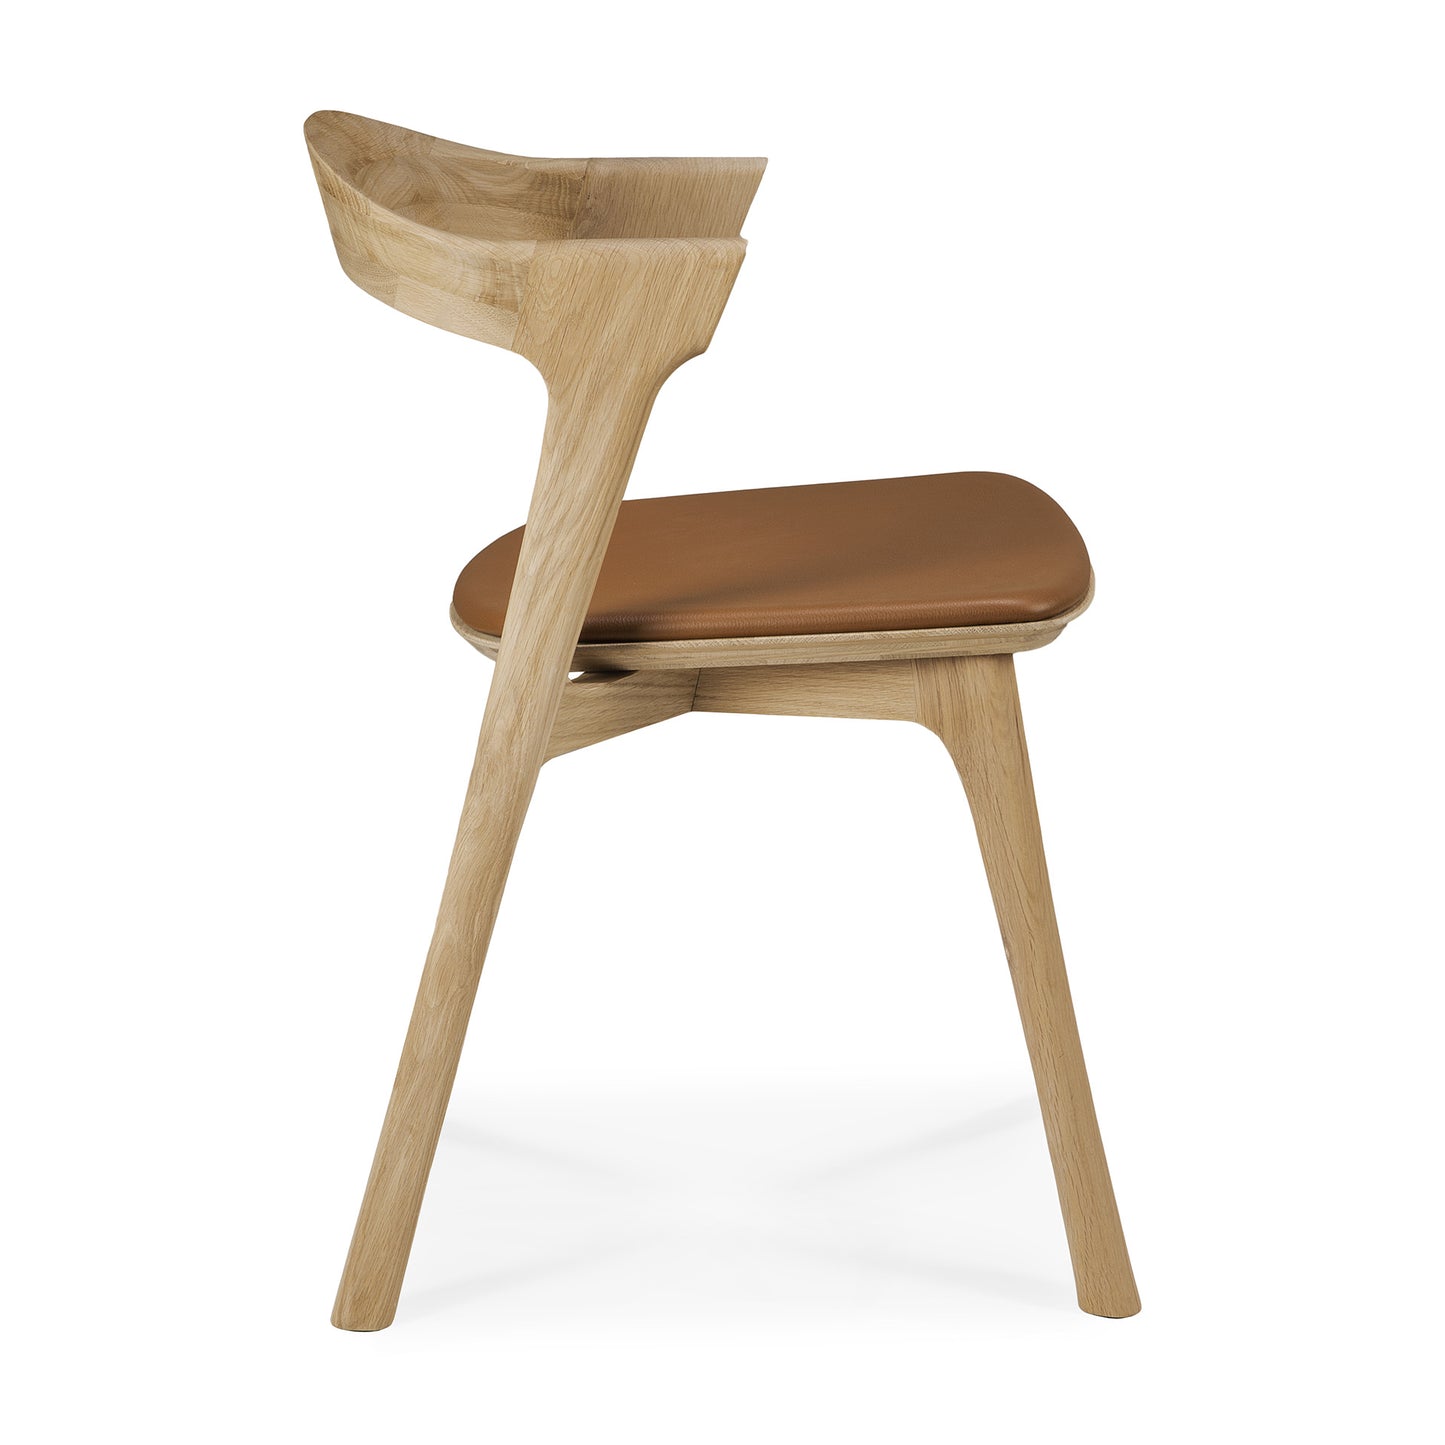 Ethnicraft Oak Bok Cognac Leather Dining Chair is available from Make Your House A Home, Bendigo, Victoria, Australia